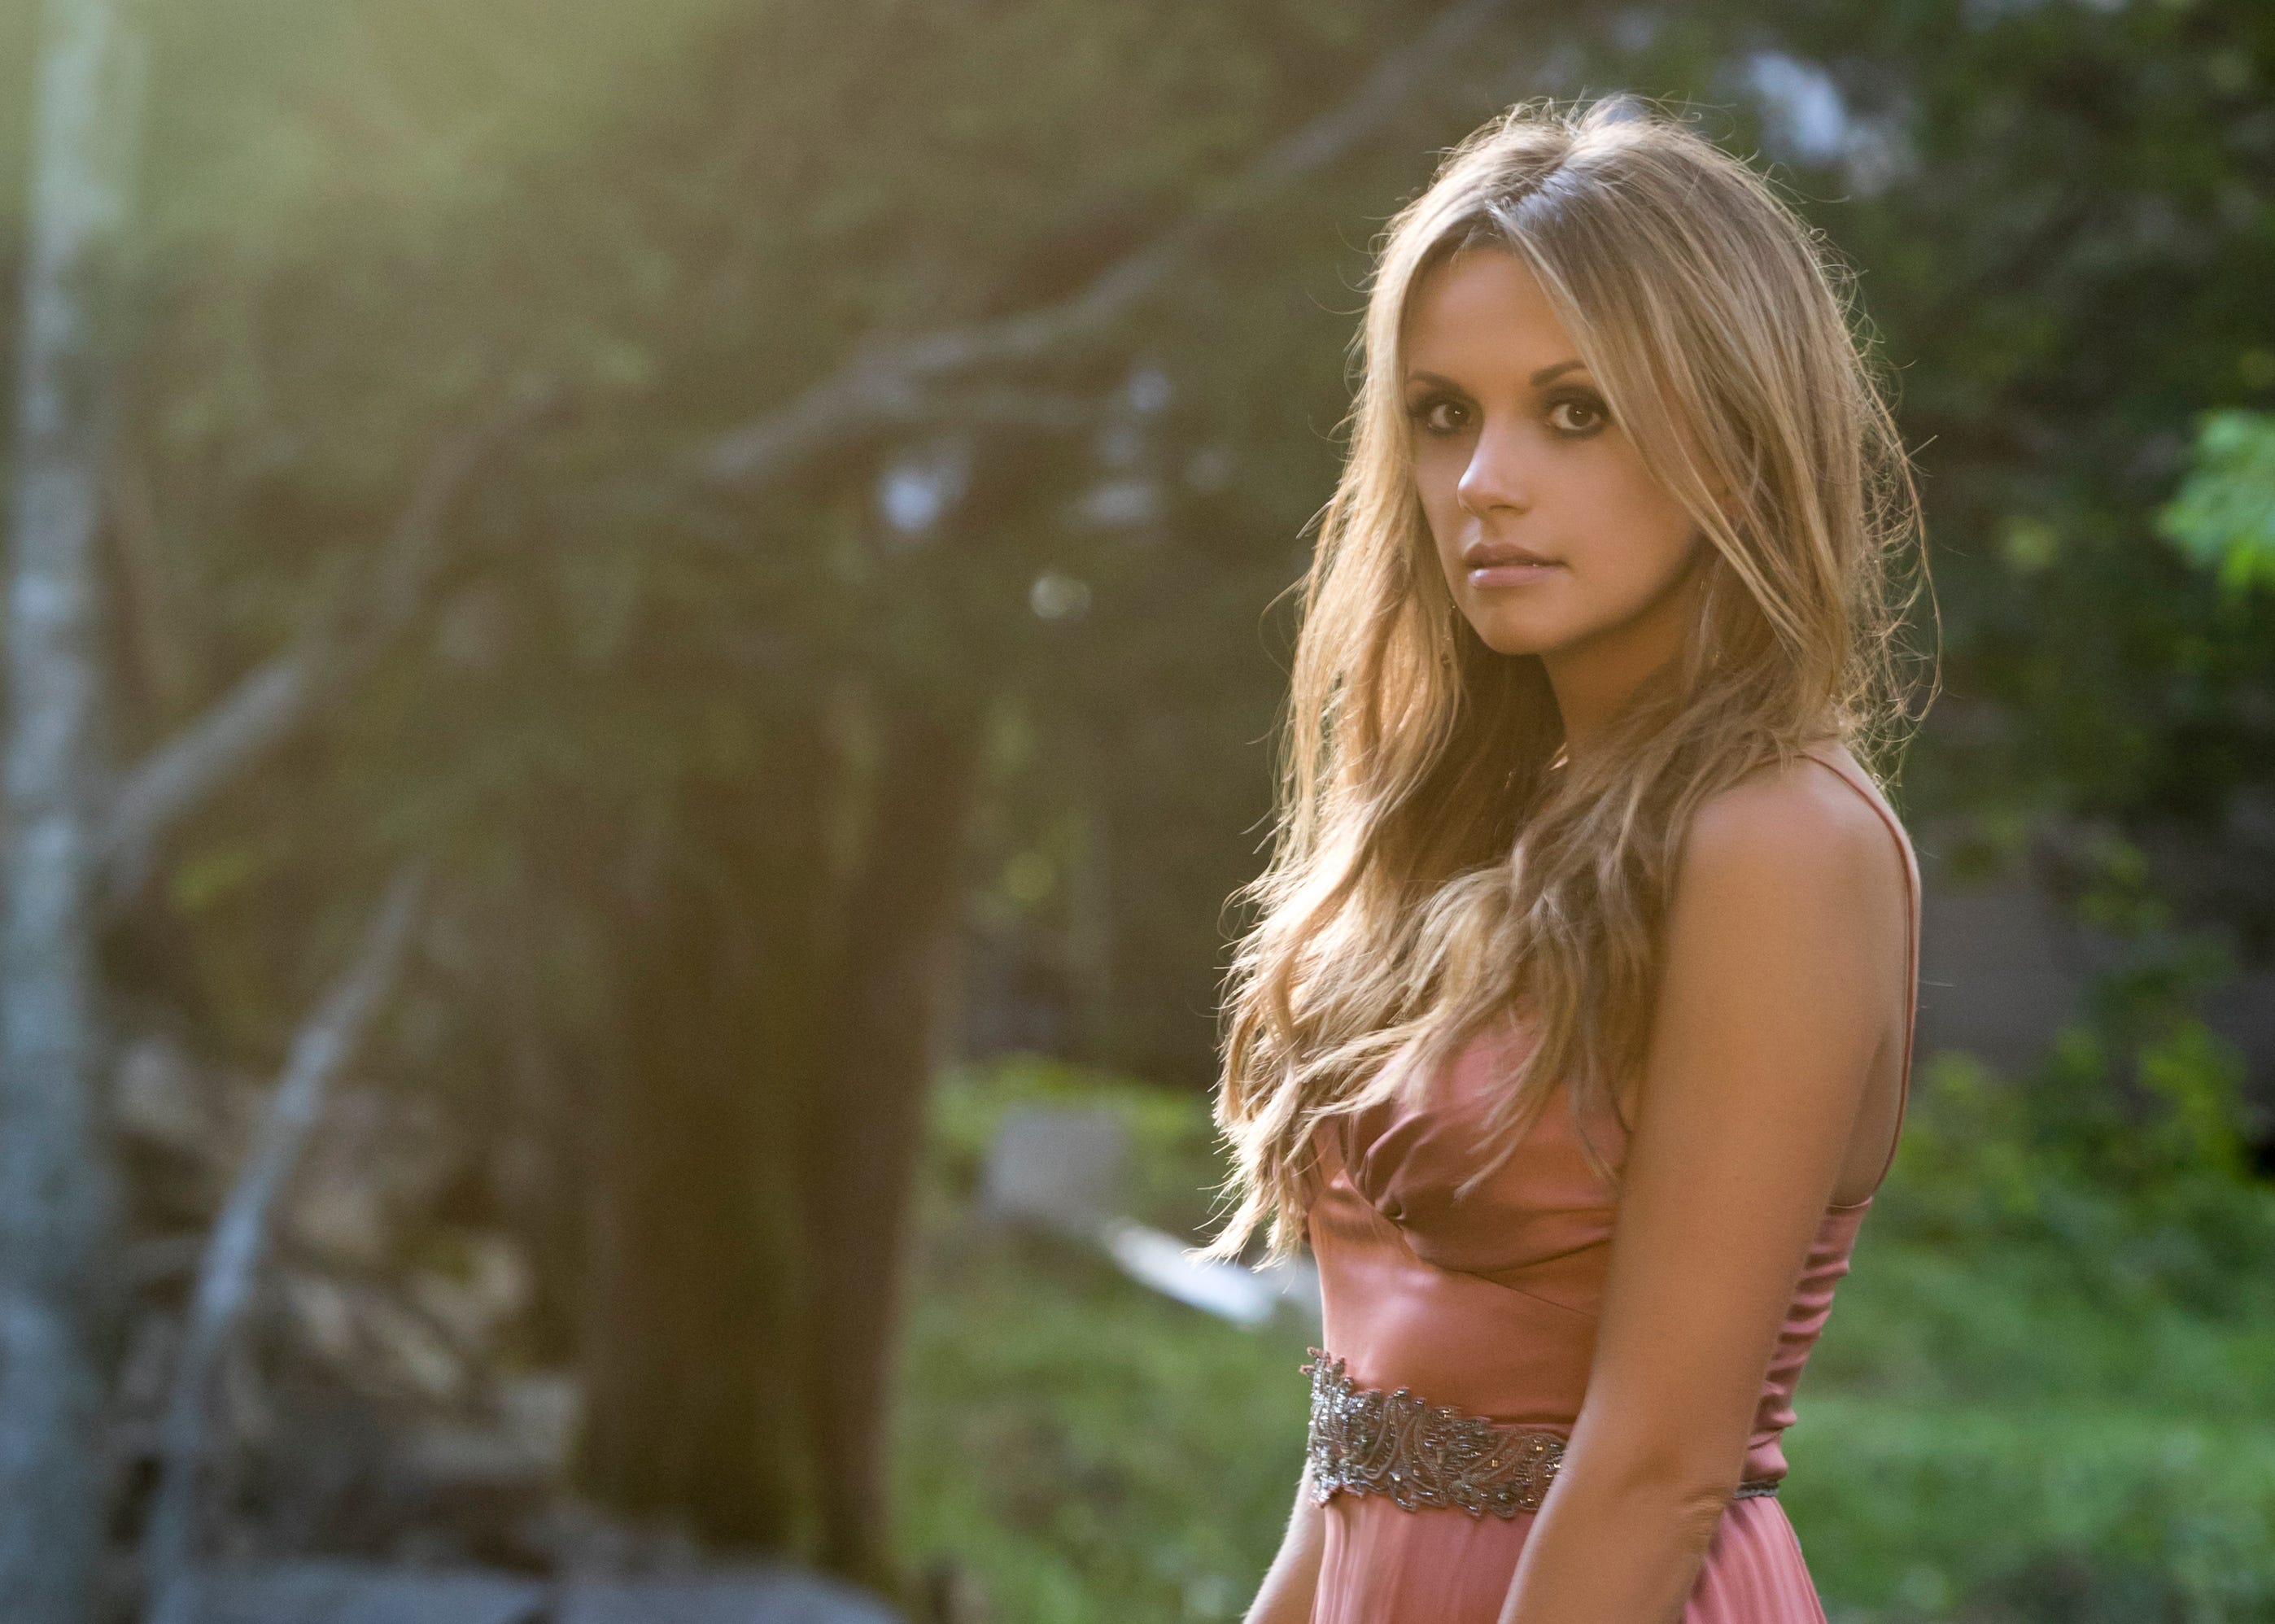 Carly Pearce On The Glass Ceiling At Country Radio